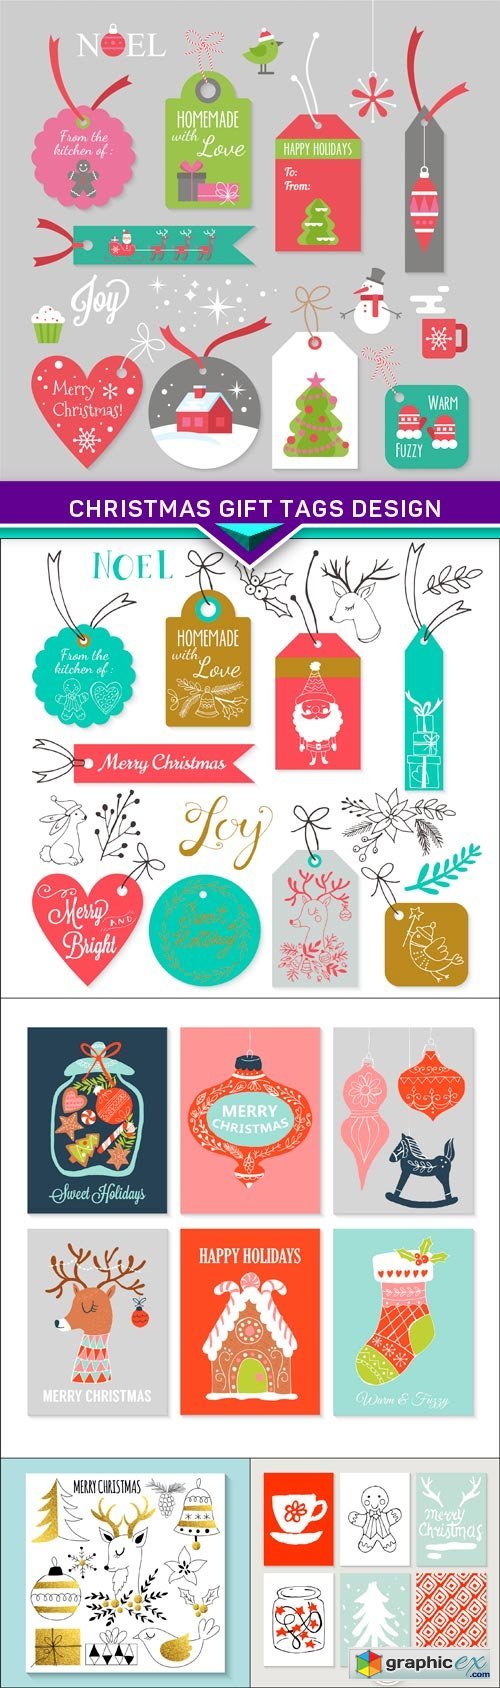 Christmas gift tags design with flat modern icons 5X EPS